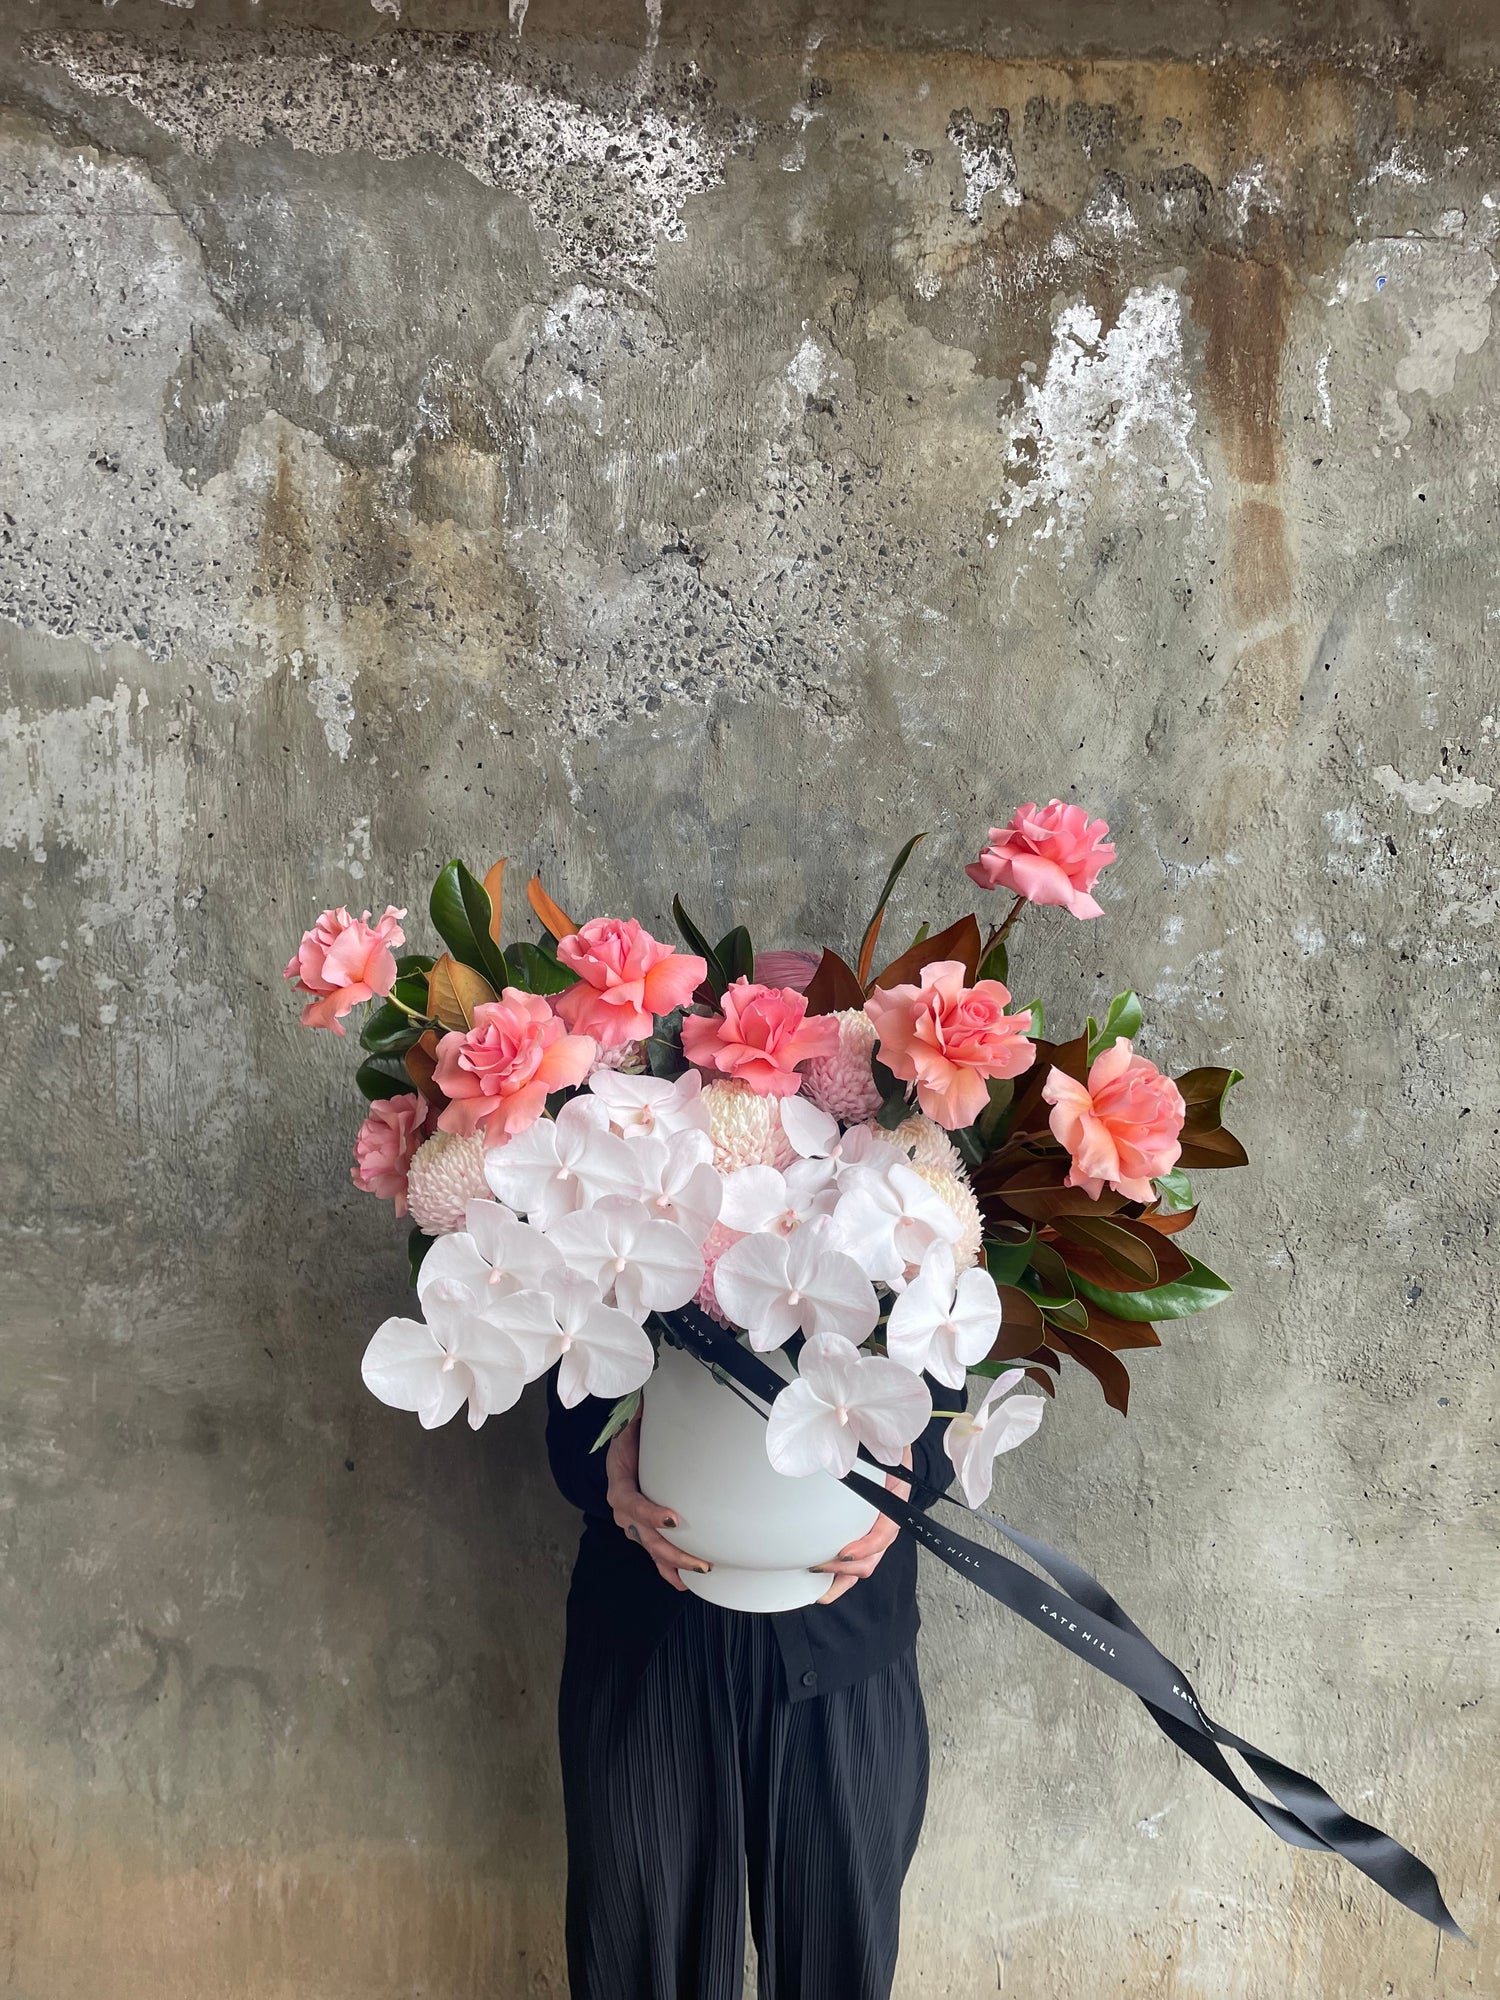 Large and luxe white ceramic vase displaying luxe watermelon roses, blush pink flowers and magnolia foliage. Design sitting on a black bentwood chair with concrete wall behind.